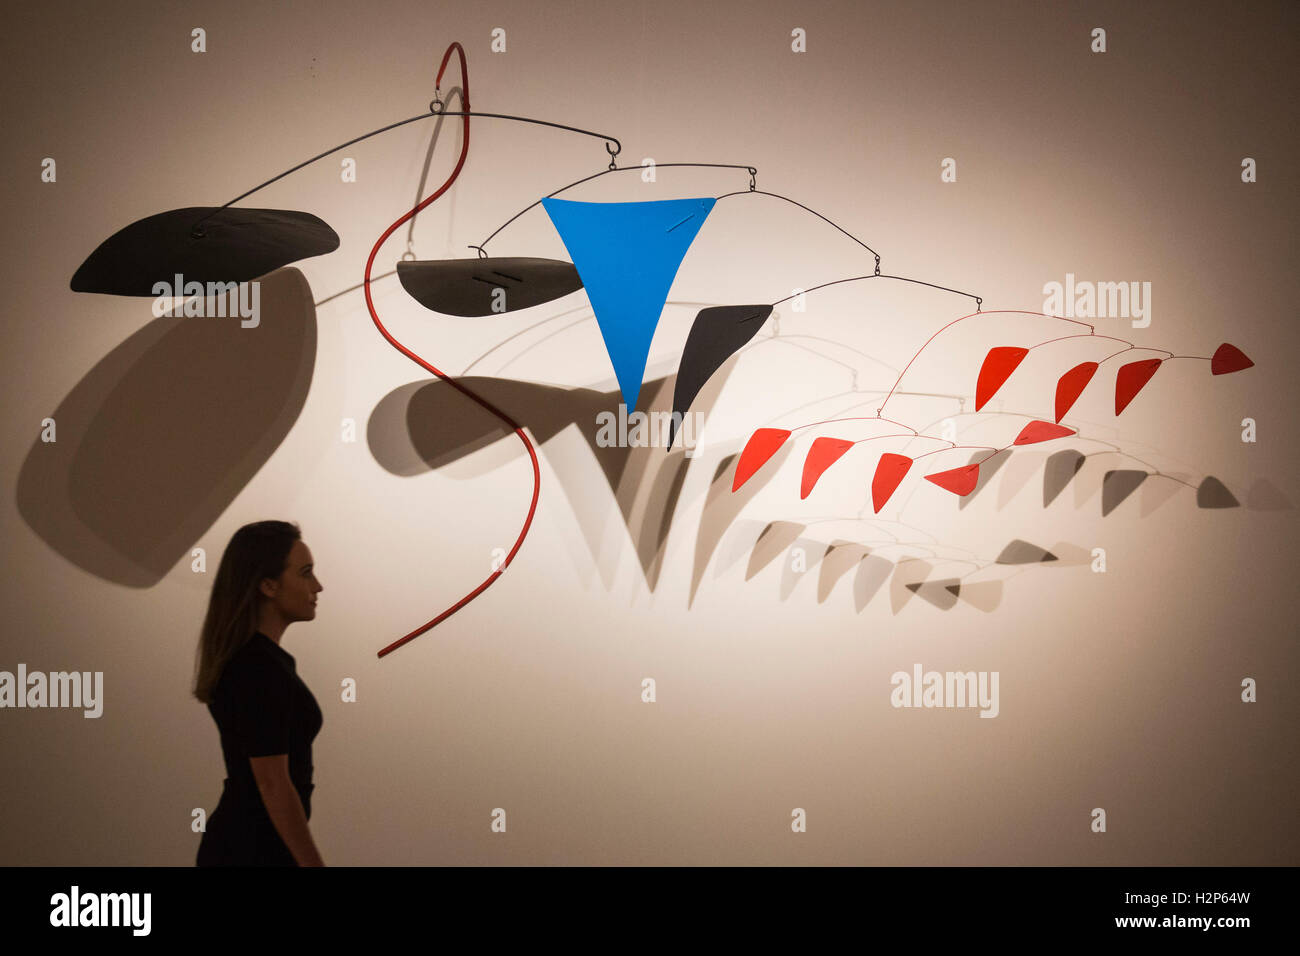 London, UK. 30 September 2016. Le Serpent rouge (The Red Snake), by Alexander Calder. Estimate GBP 2-3m. Christie's presents highlights from the Leslie Waddington Collection on 4 October 2016. Stock Photo